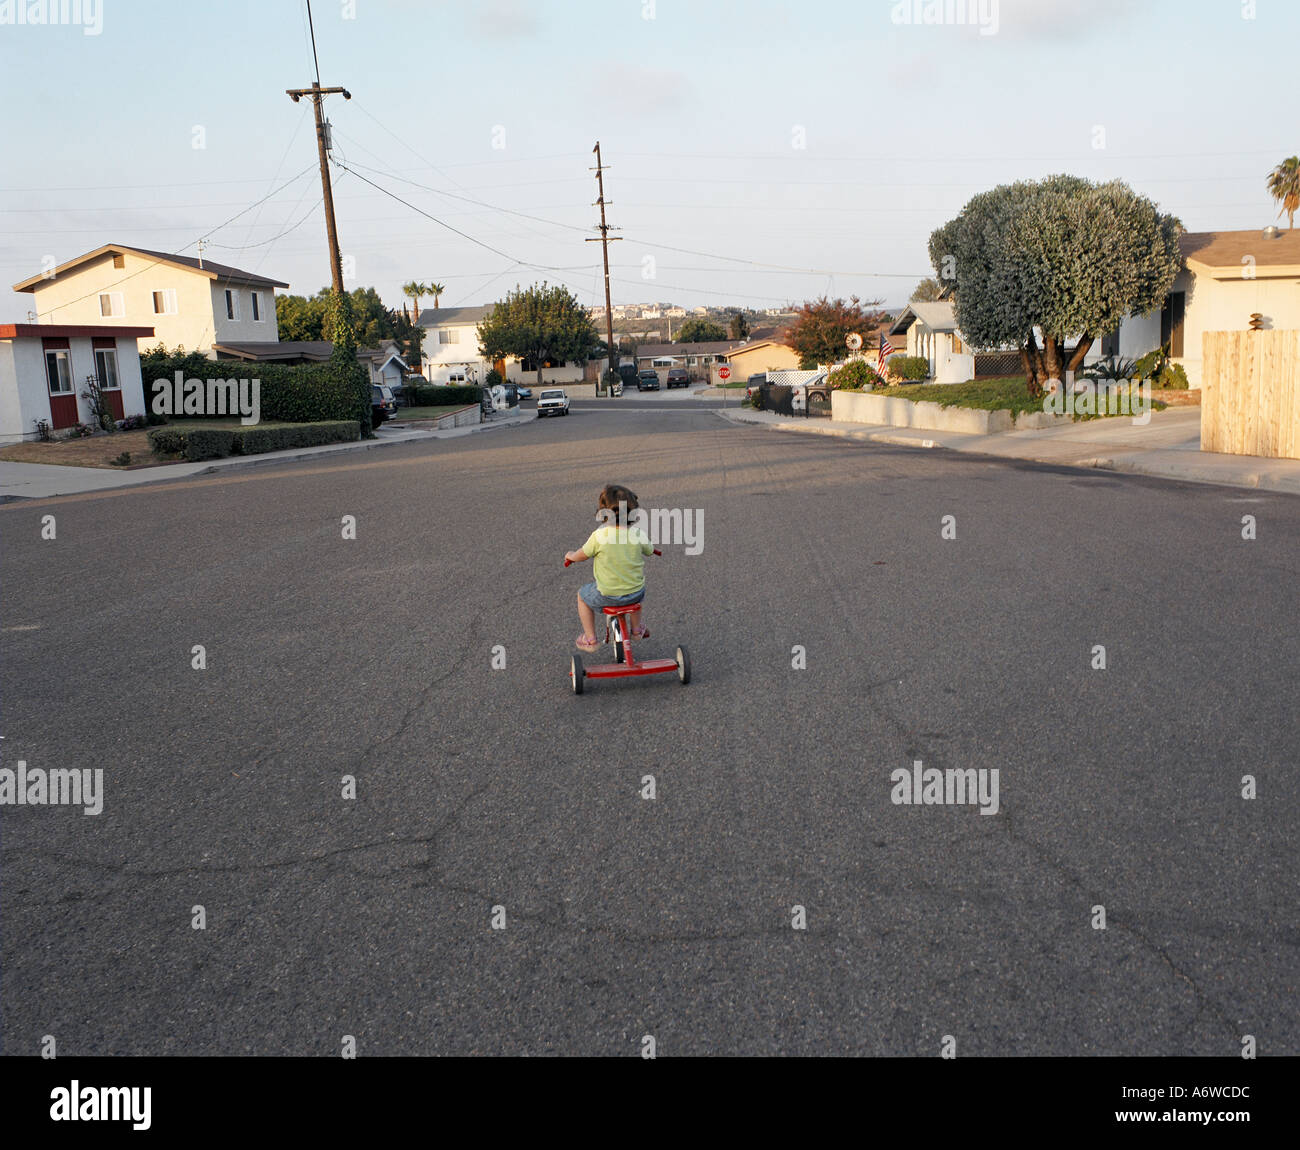 Child on red trycylce ridding down the street of a culdesac Stock Photo